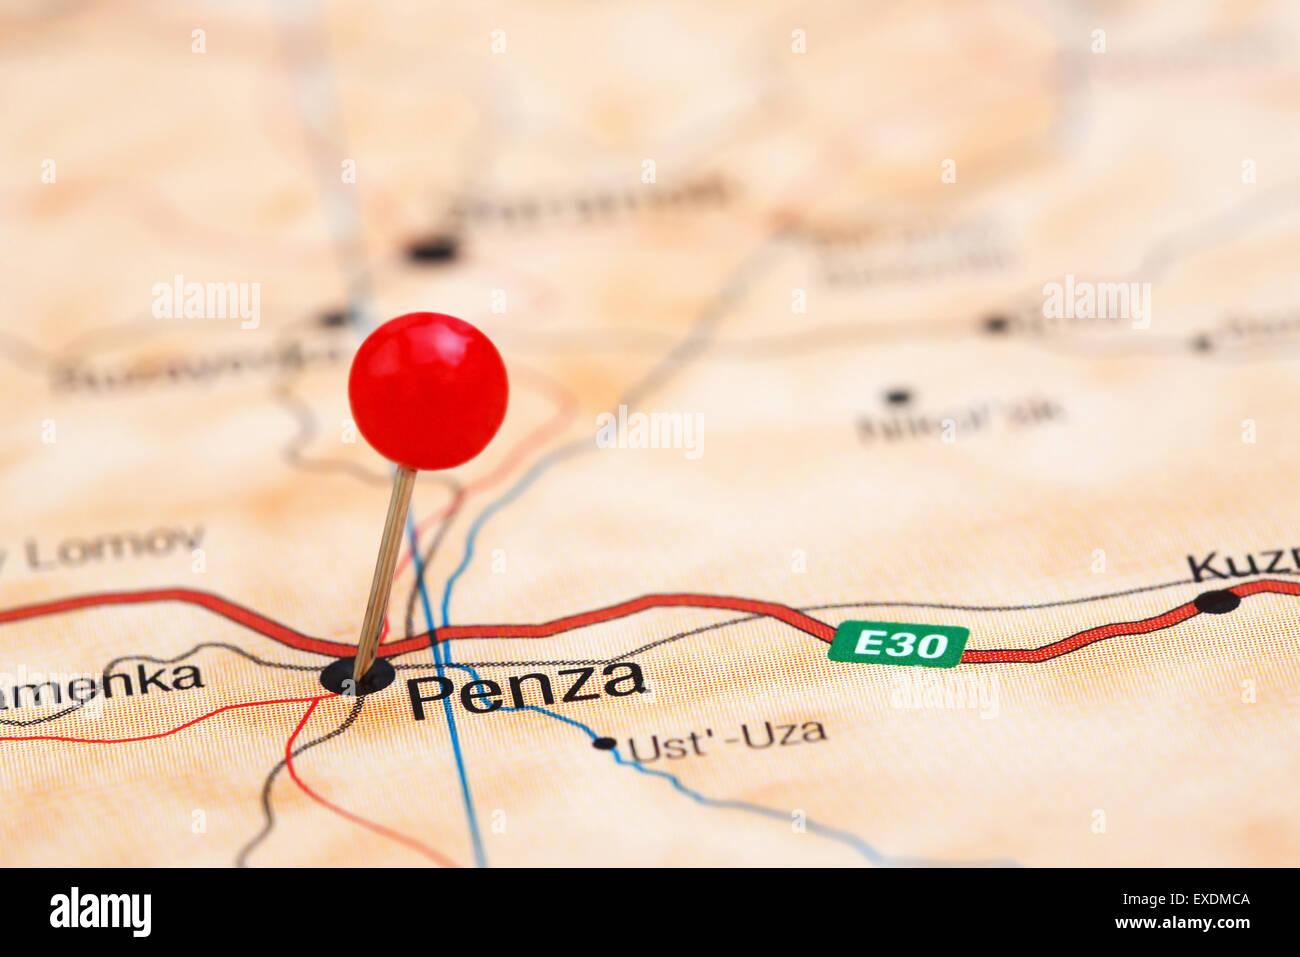 Penza pinned on a map of europe Stock Photo